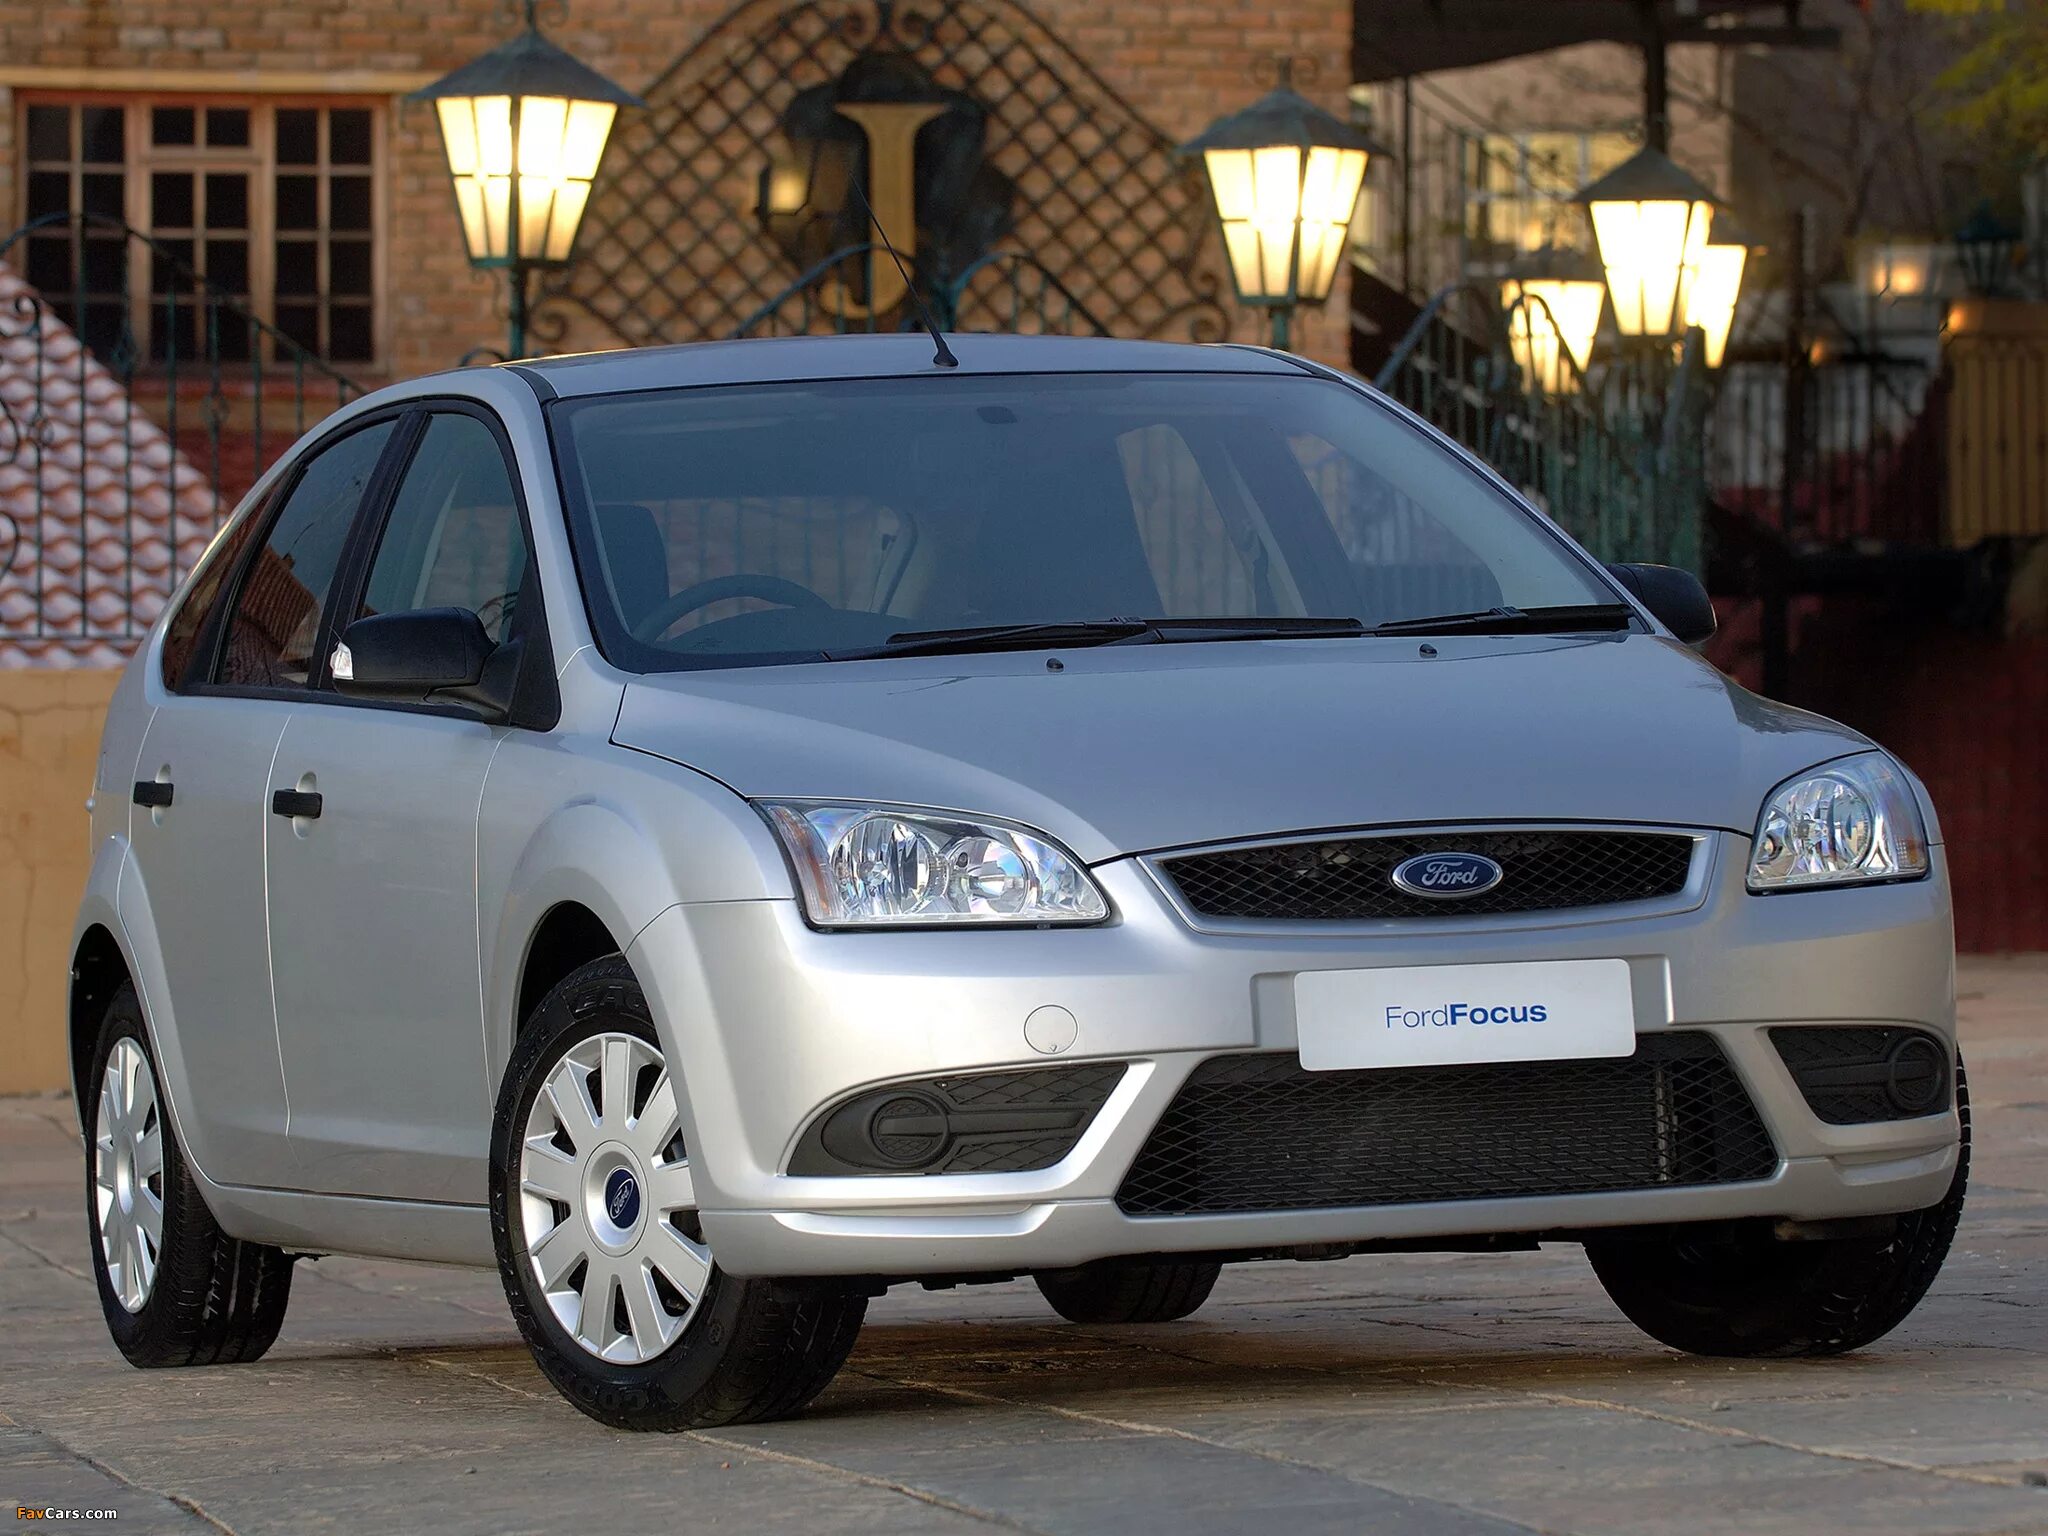 Ford Focus 5. Ford Focus 1. Форд фокус 2 999. Ford Focus 4х4.